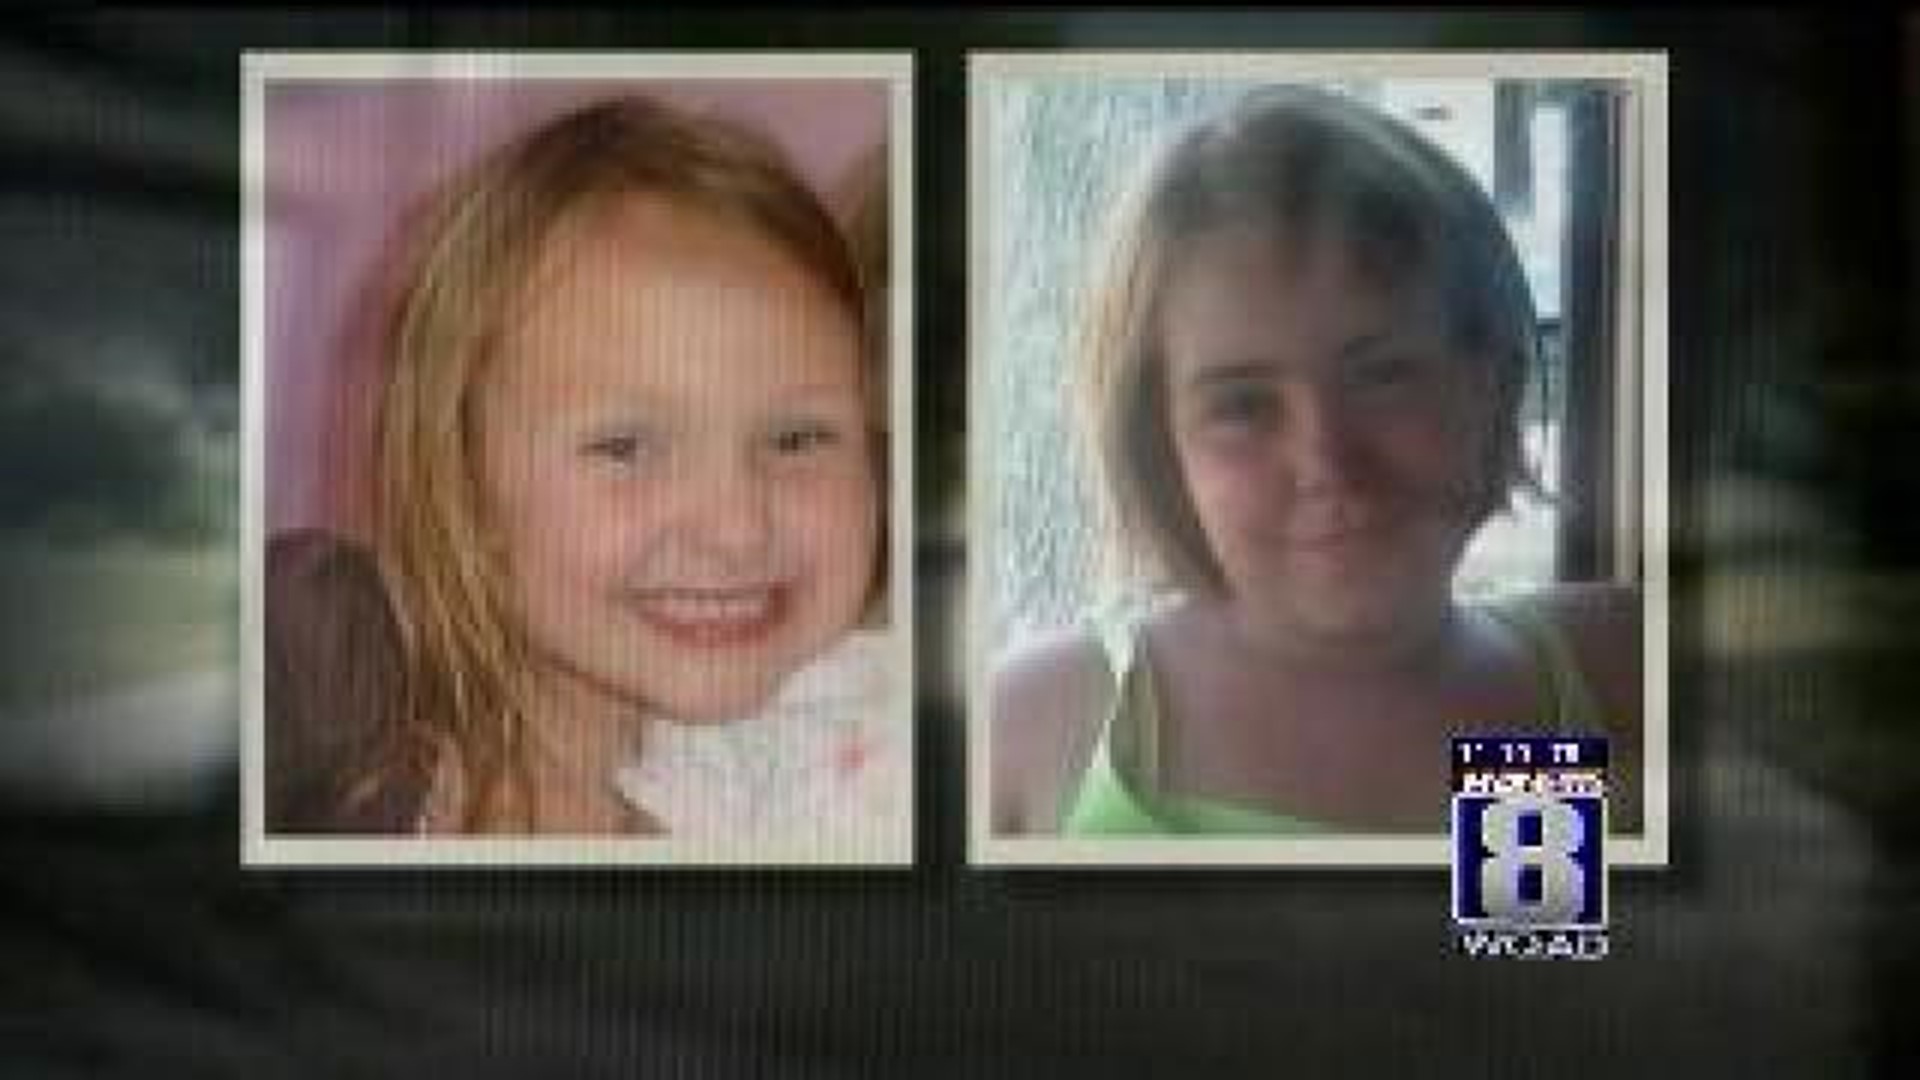 Investigators focused on reviewing interviews with missing girls' family